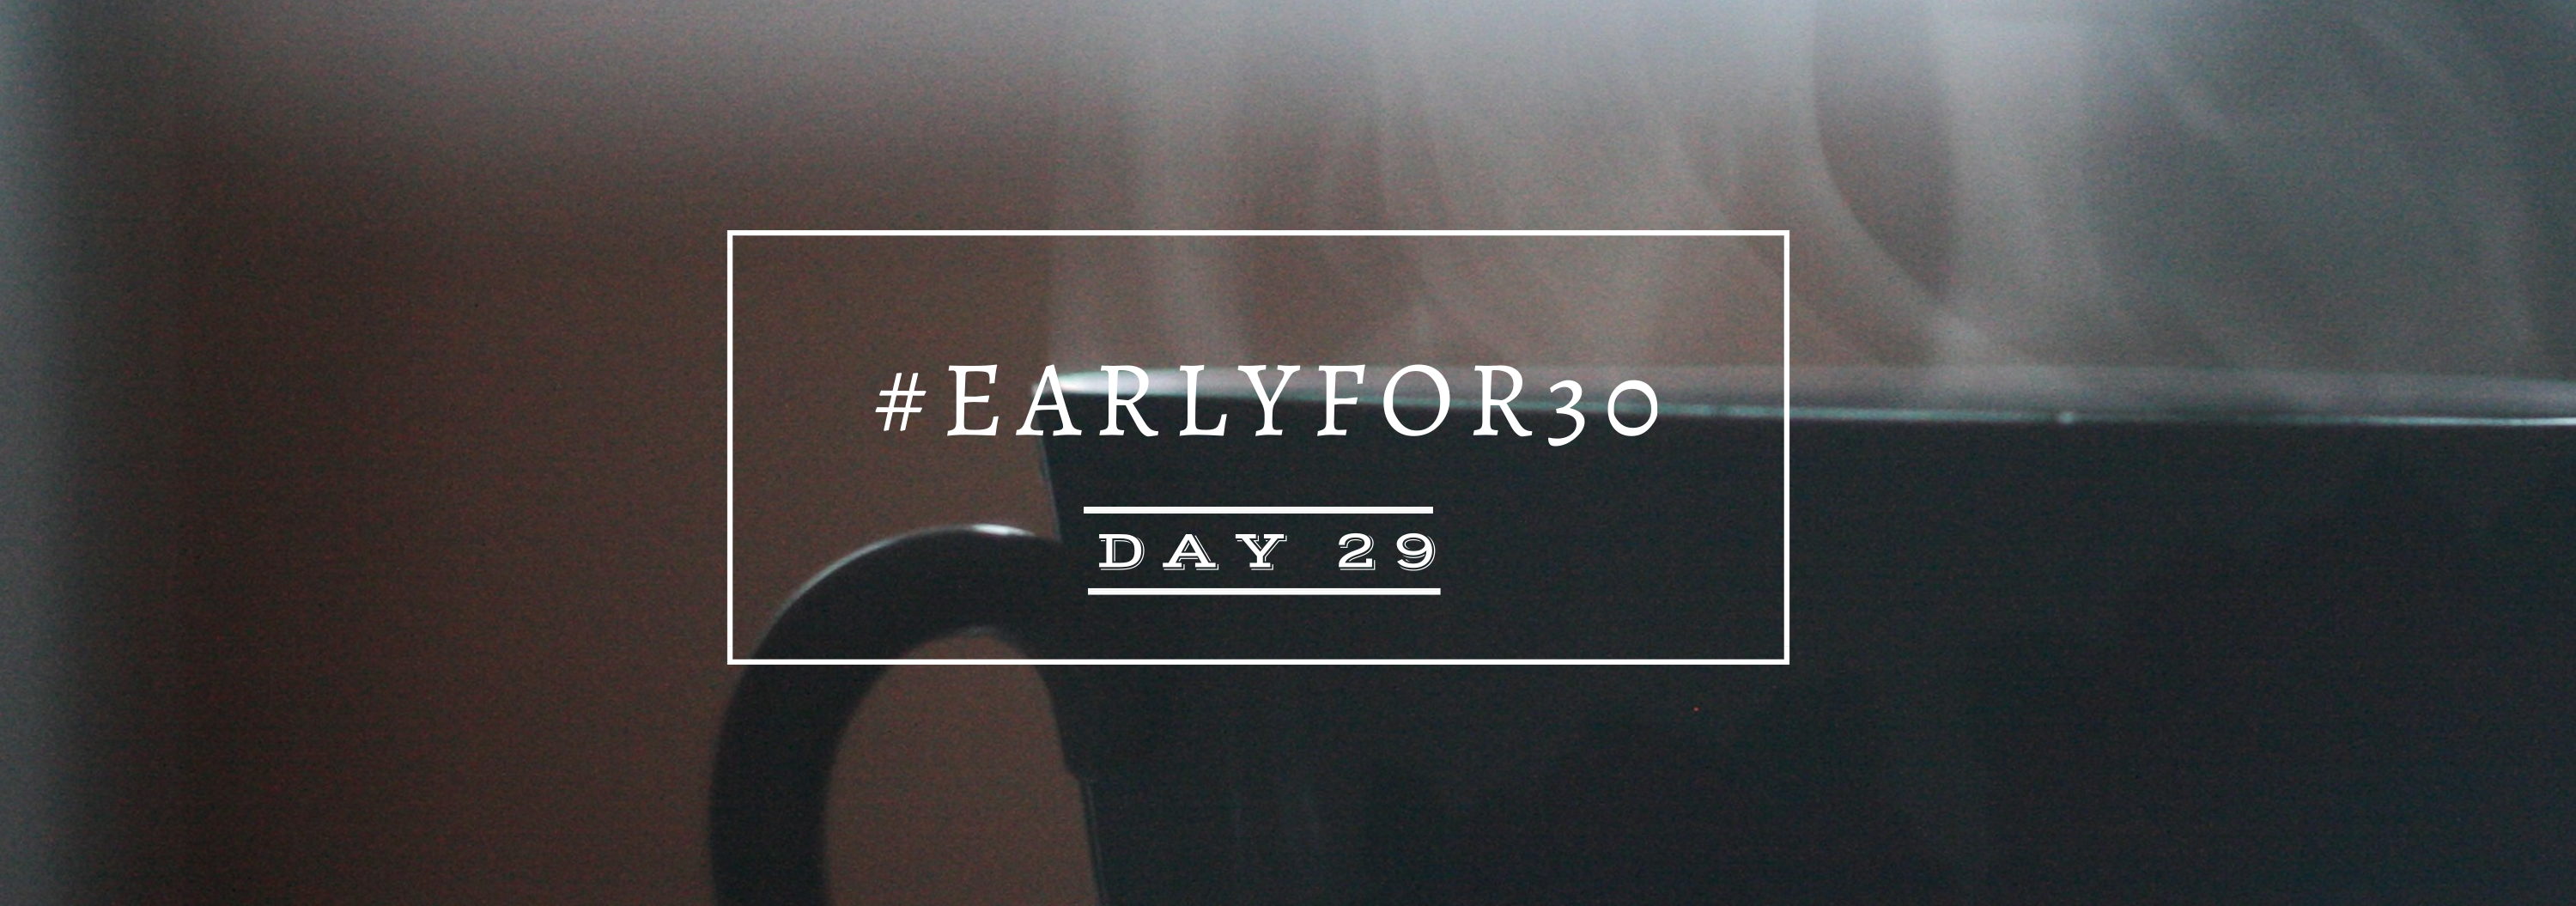 #Earlyfor30 – Day 29